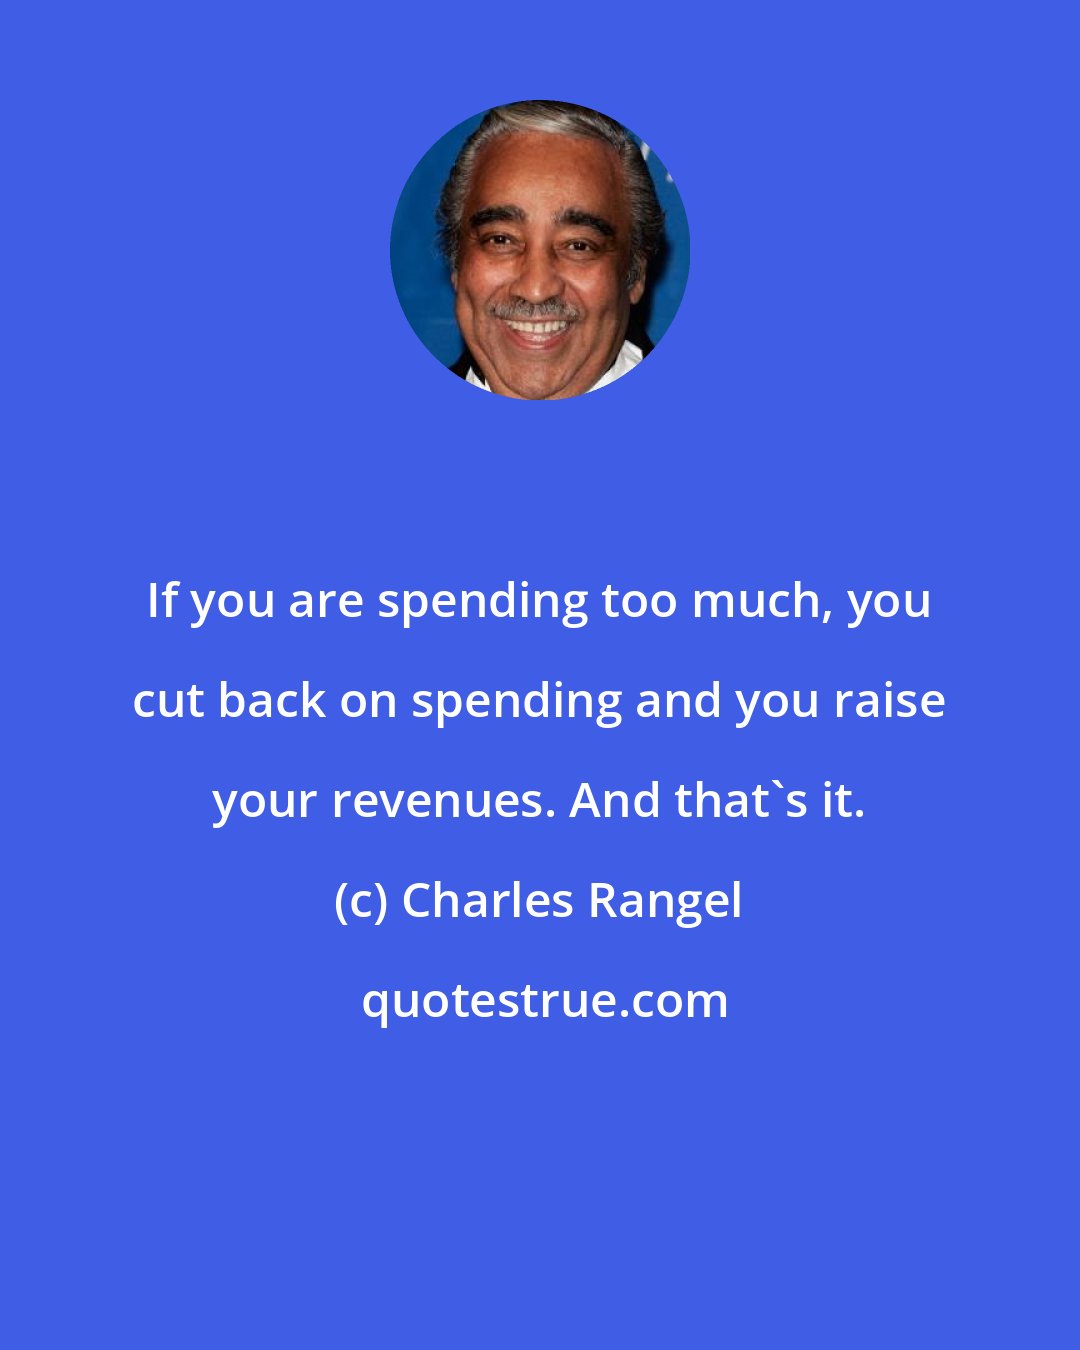 Charles Rangel: If you are spending too much, you cut back on spending and you raise your revenues. And that's it.